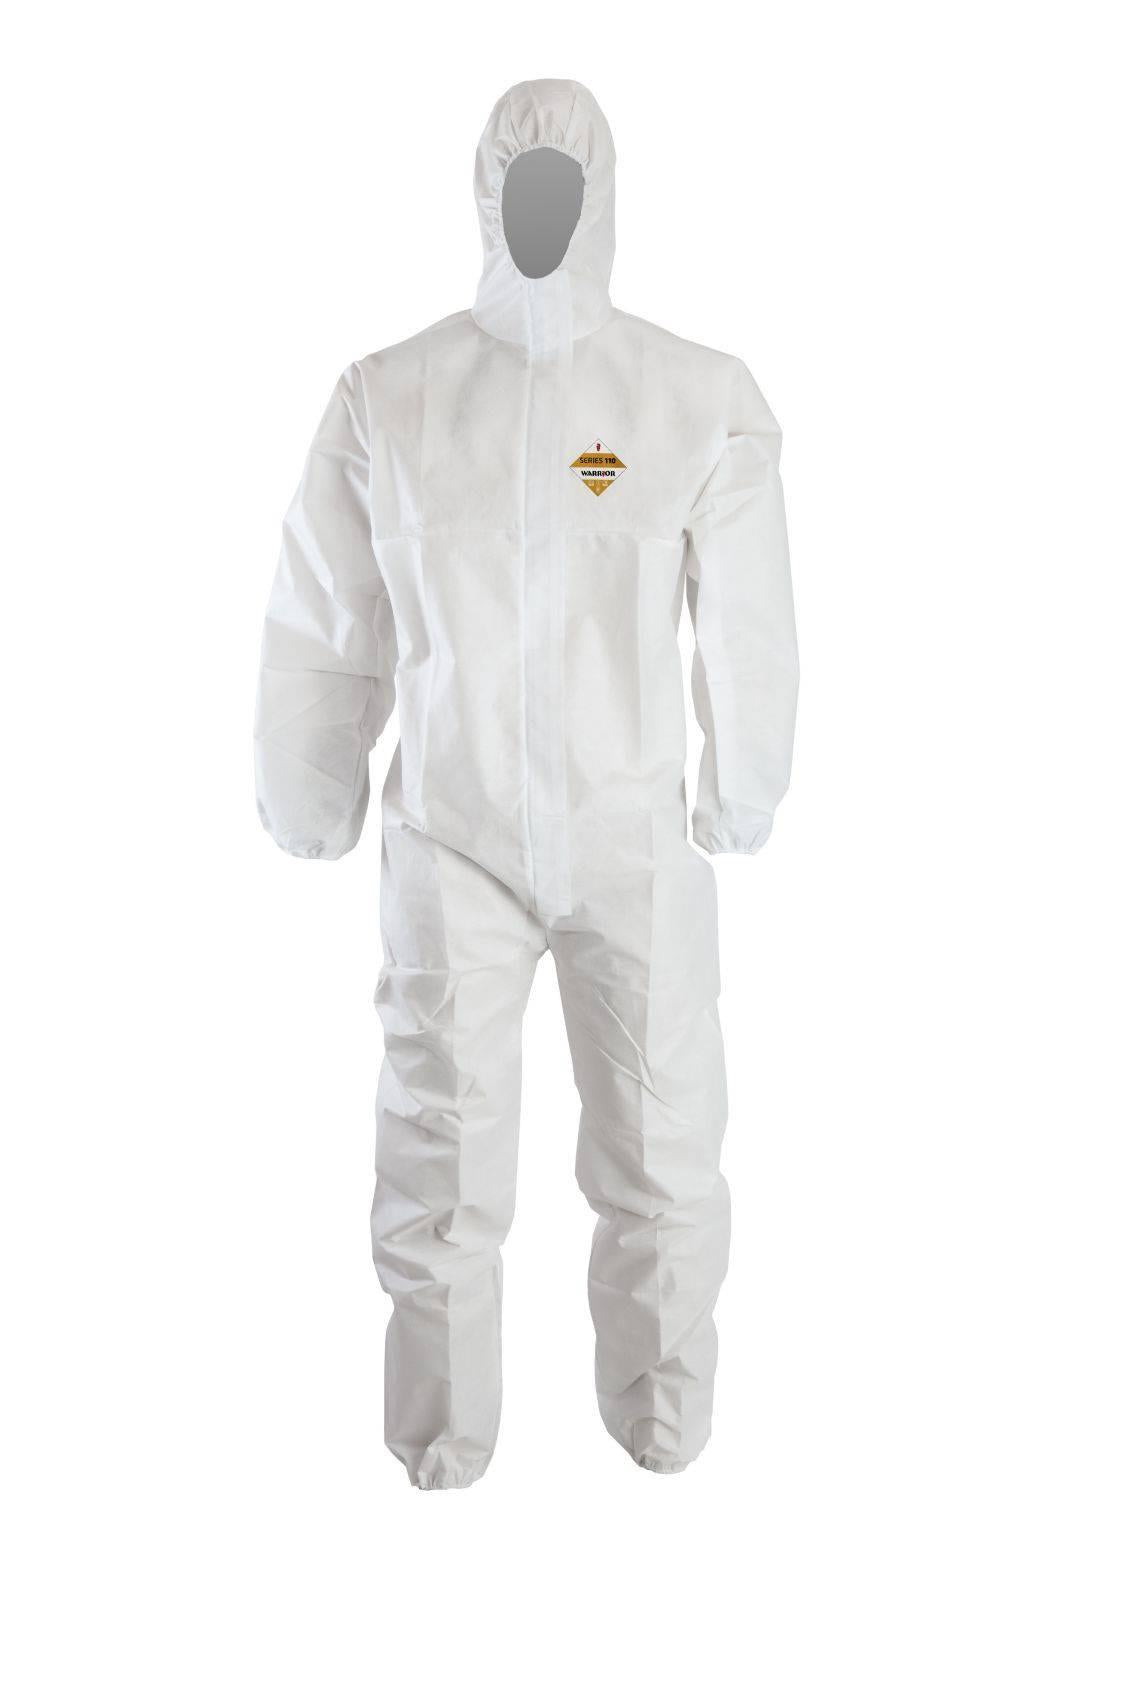 Warrior white WS110 Type 5/6 50GSM SMMS material Coverall #0122DWHZ005